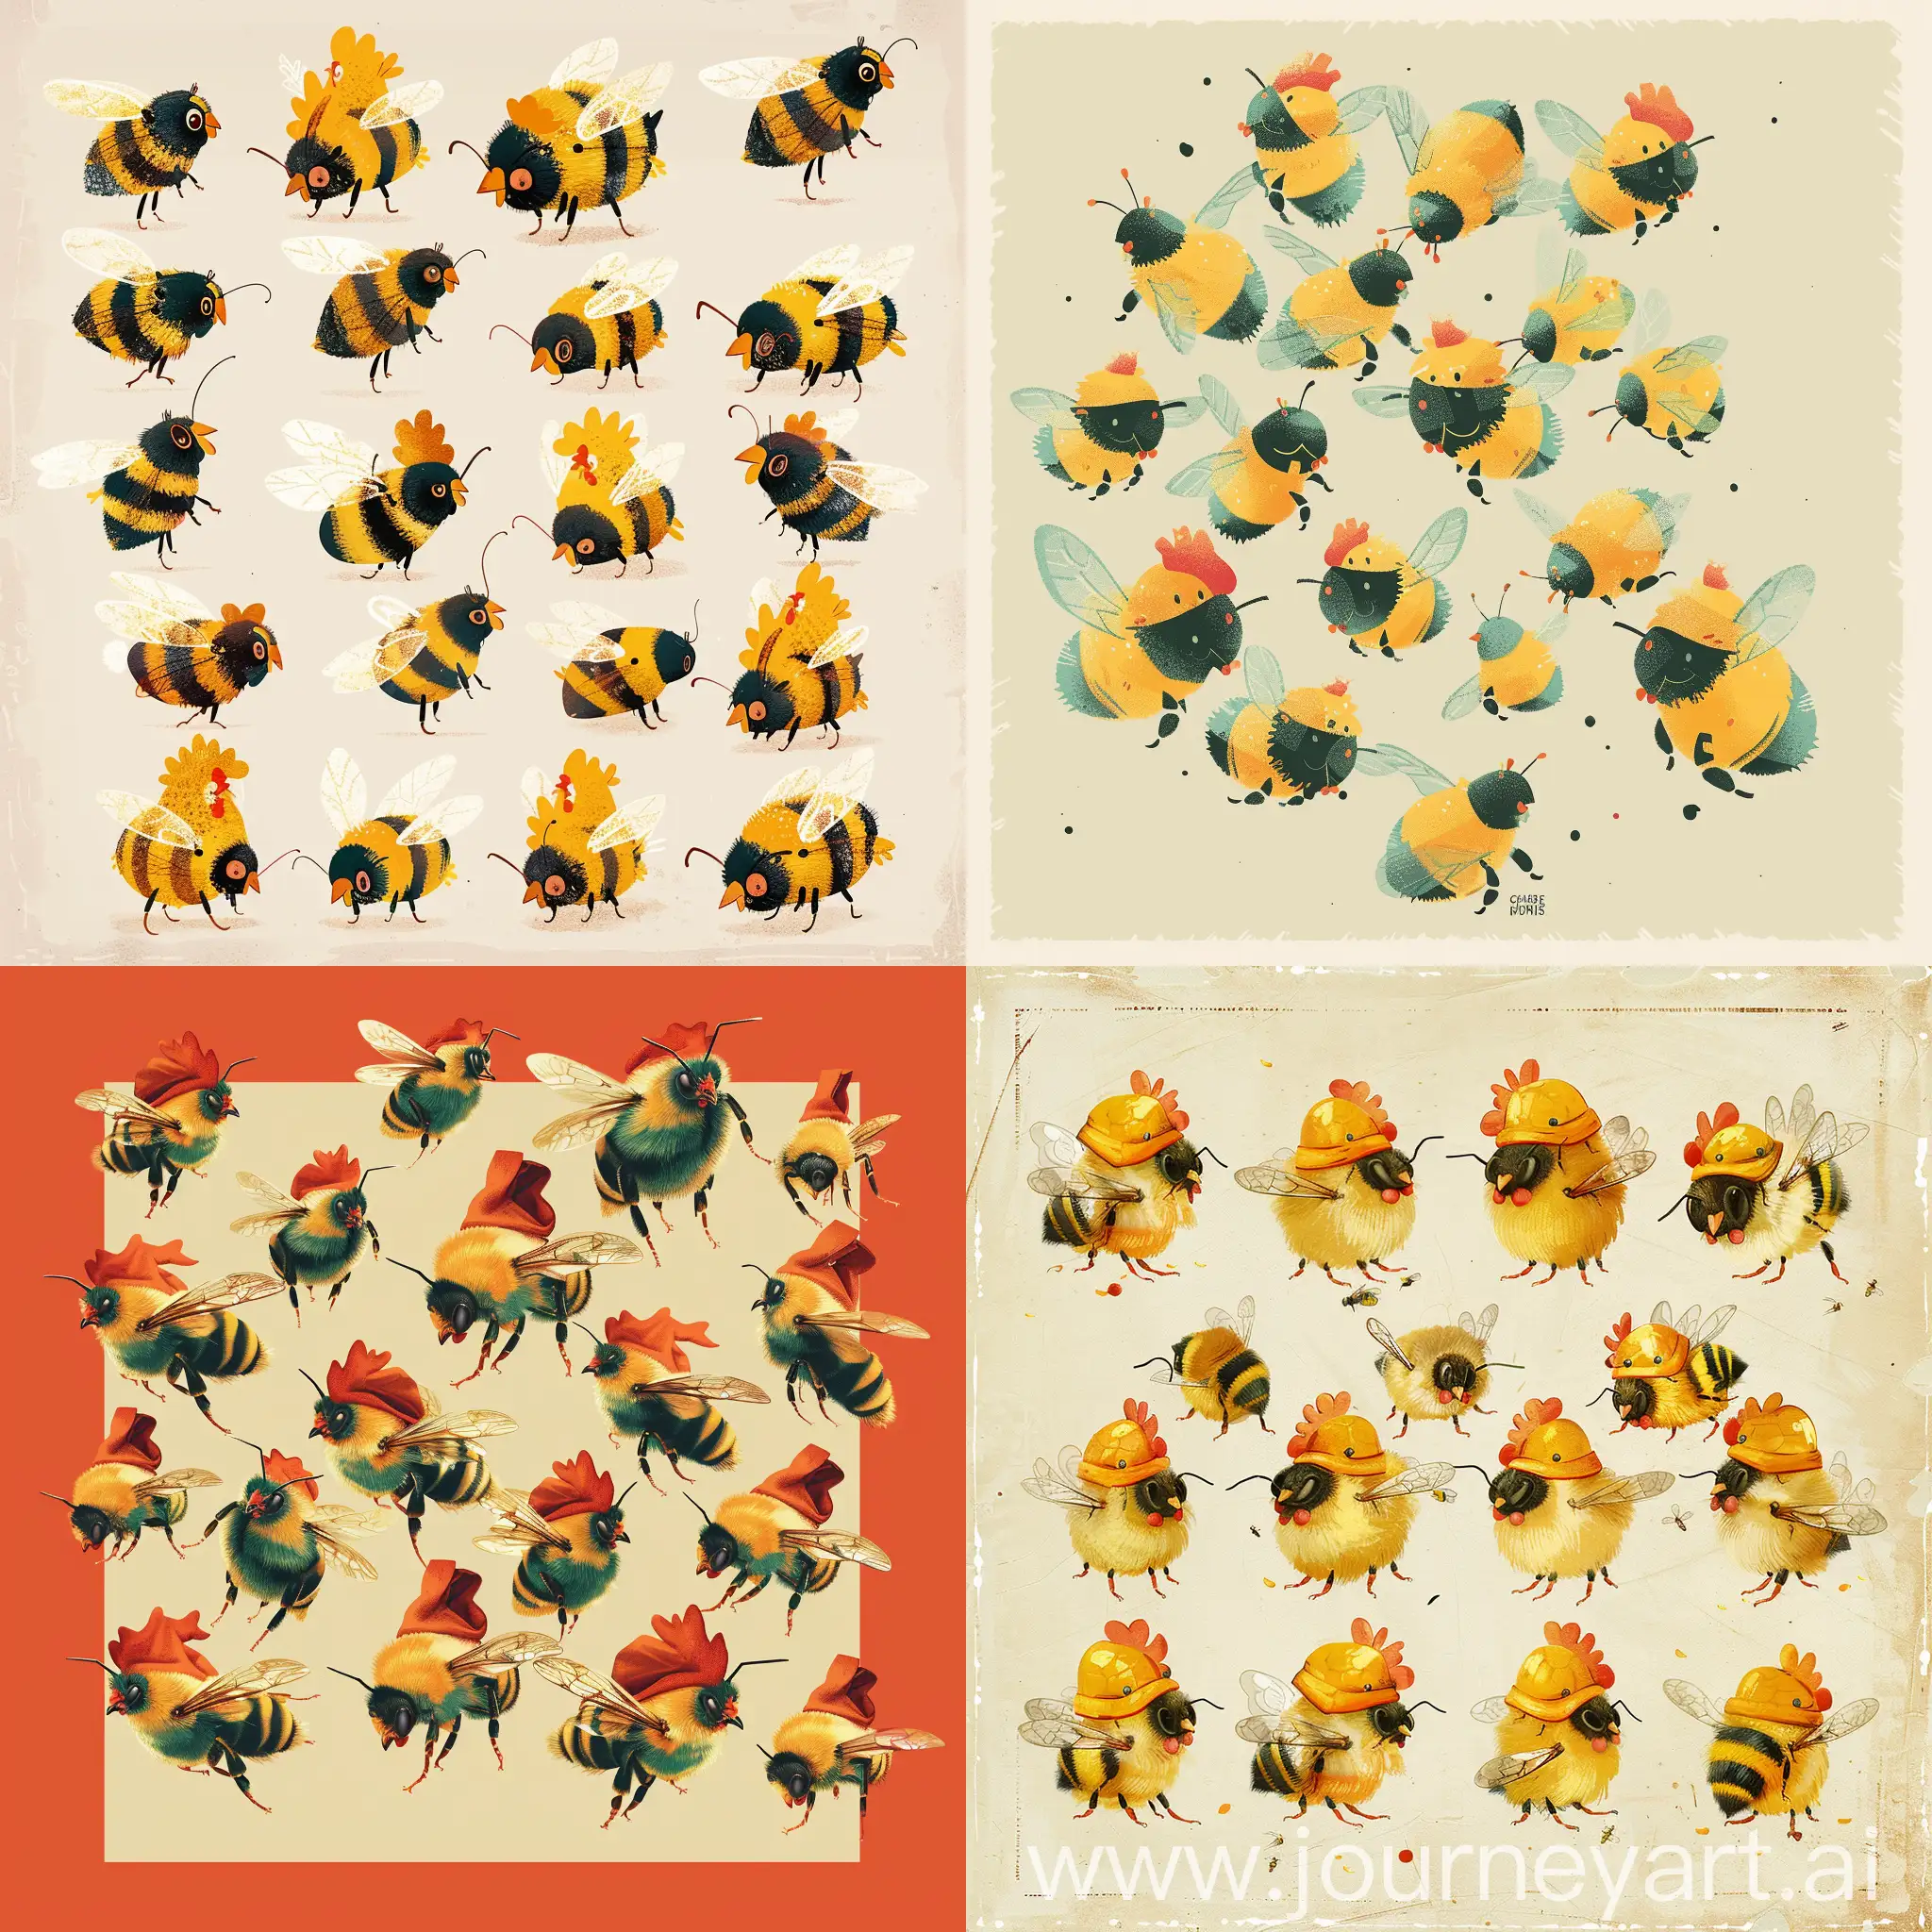 Cute-Bees-in-Chicken-Hats-Poster-for-a-Fun-Chicken-Hunt-Event